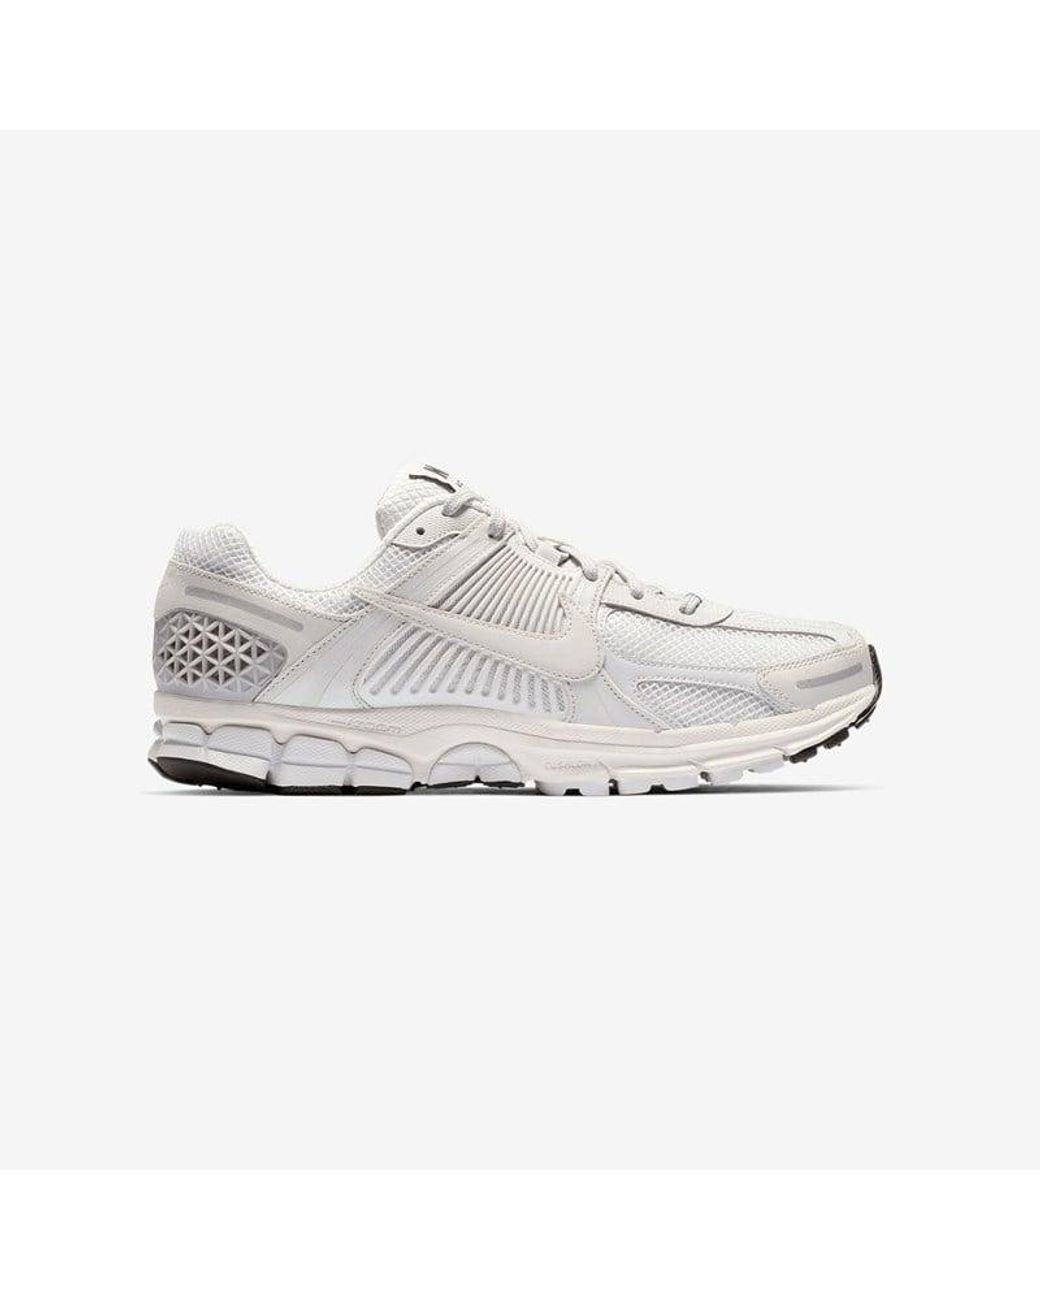 Nike Zoom Vomero 5 Sp in White | Lyst